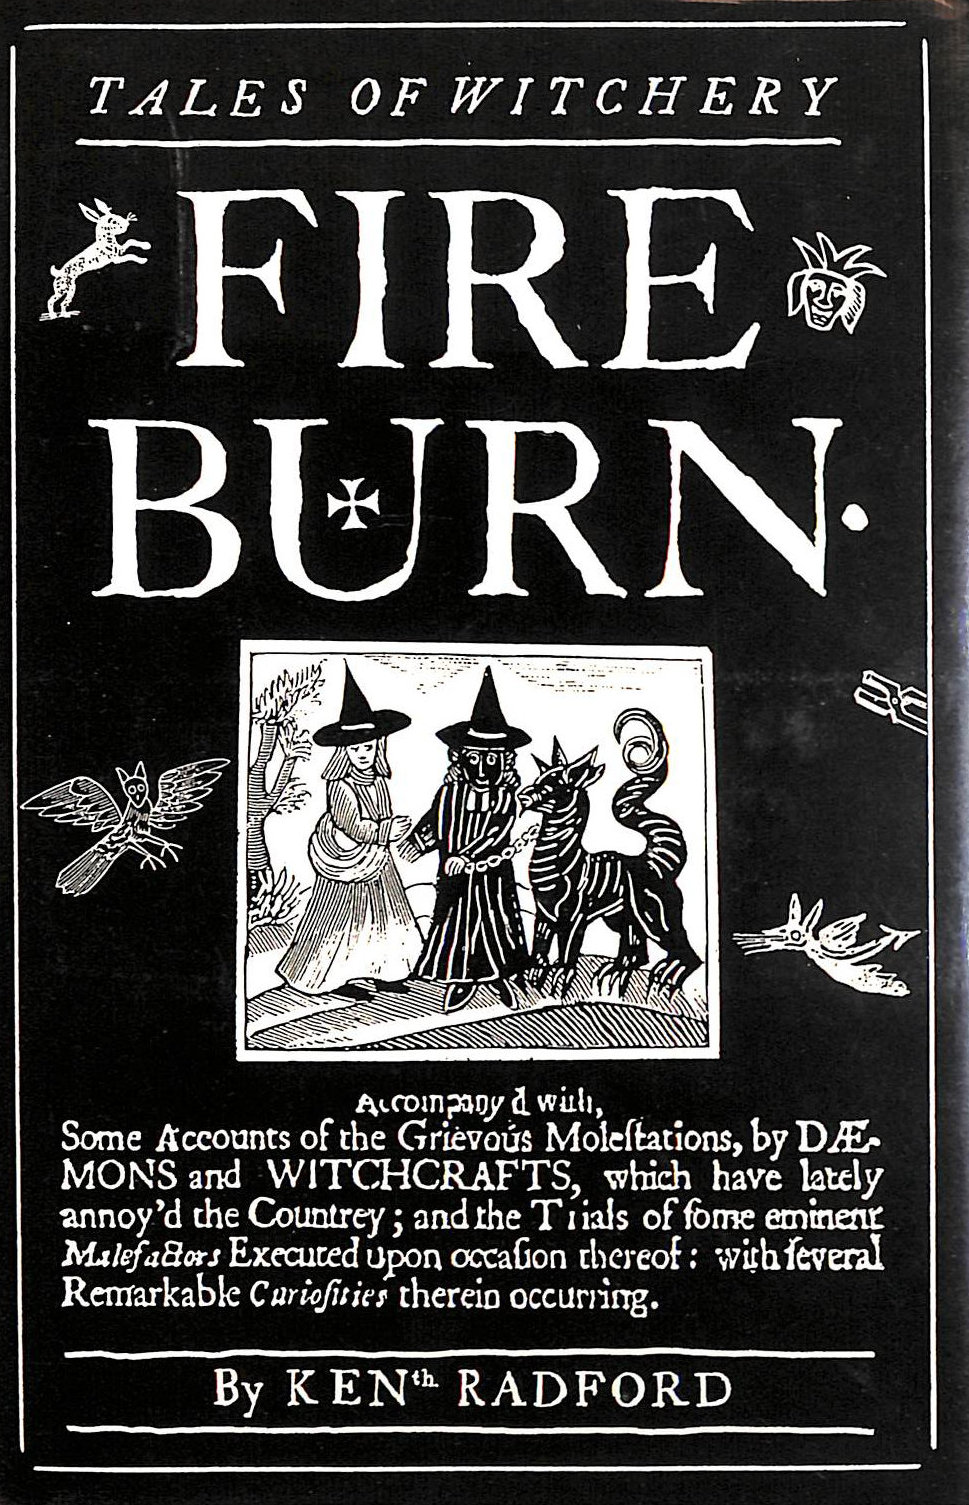  - Fire Burn: Tales of Witchery